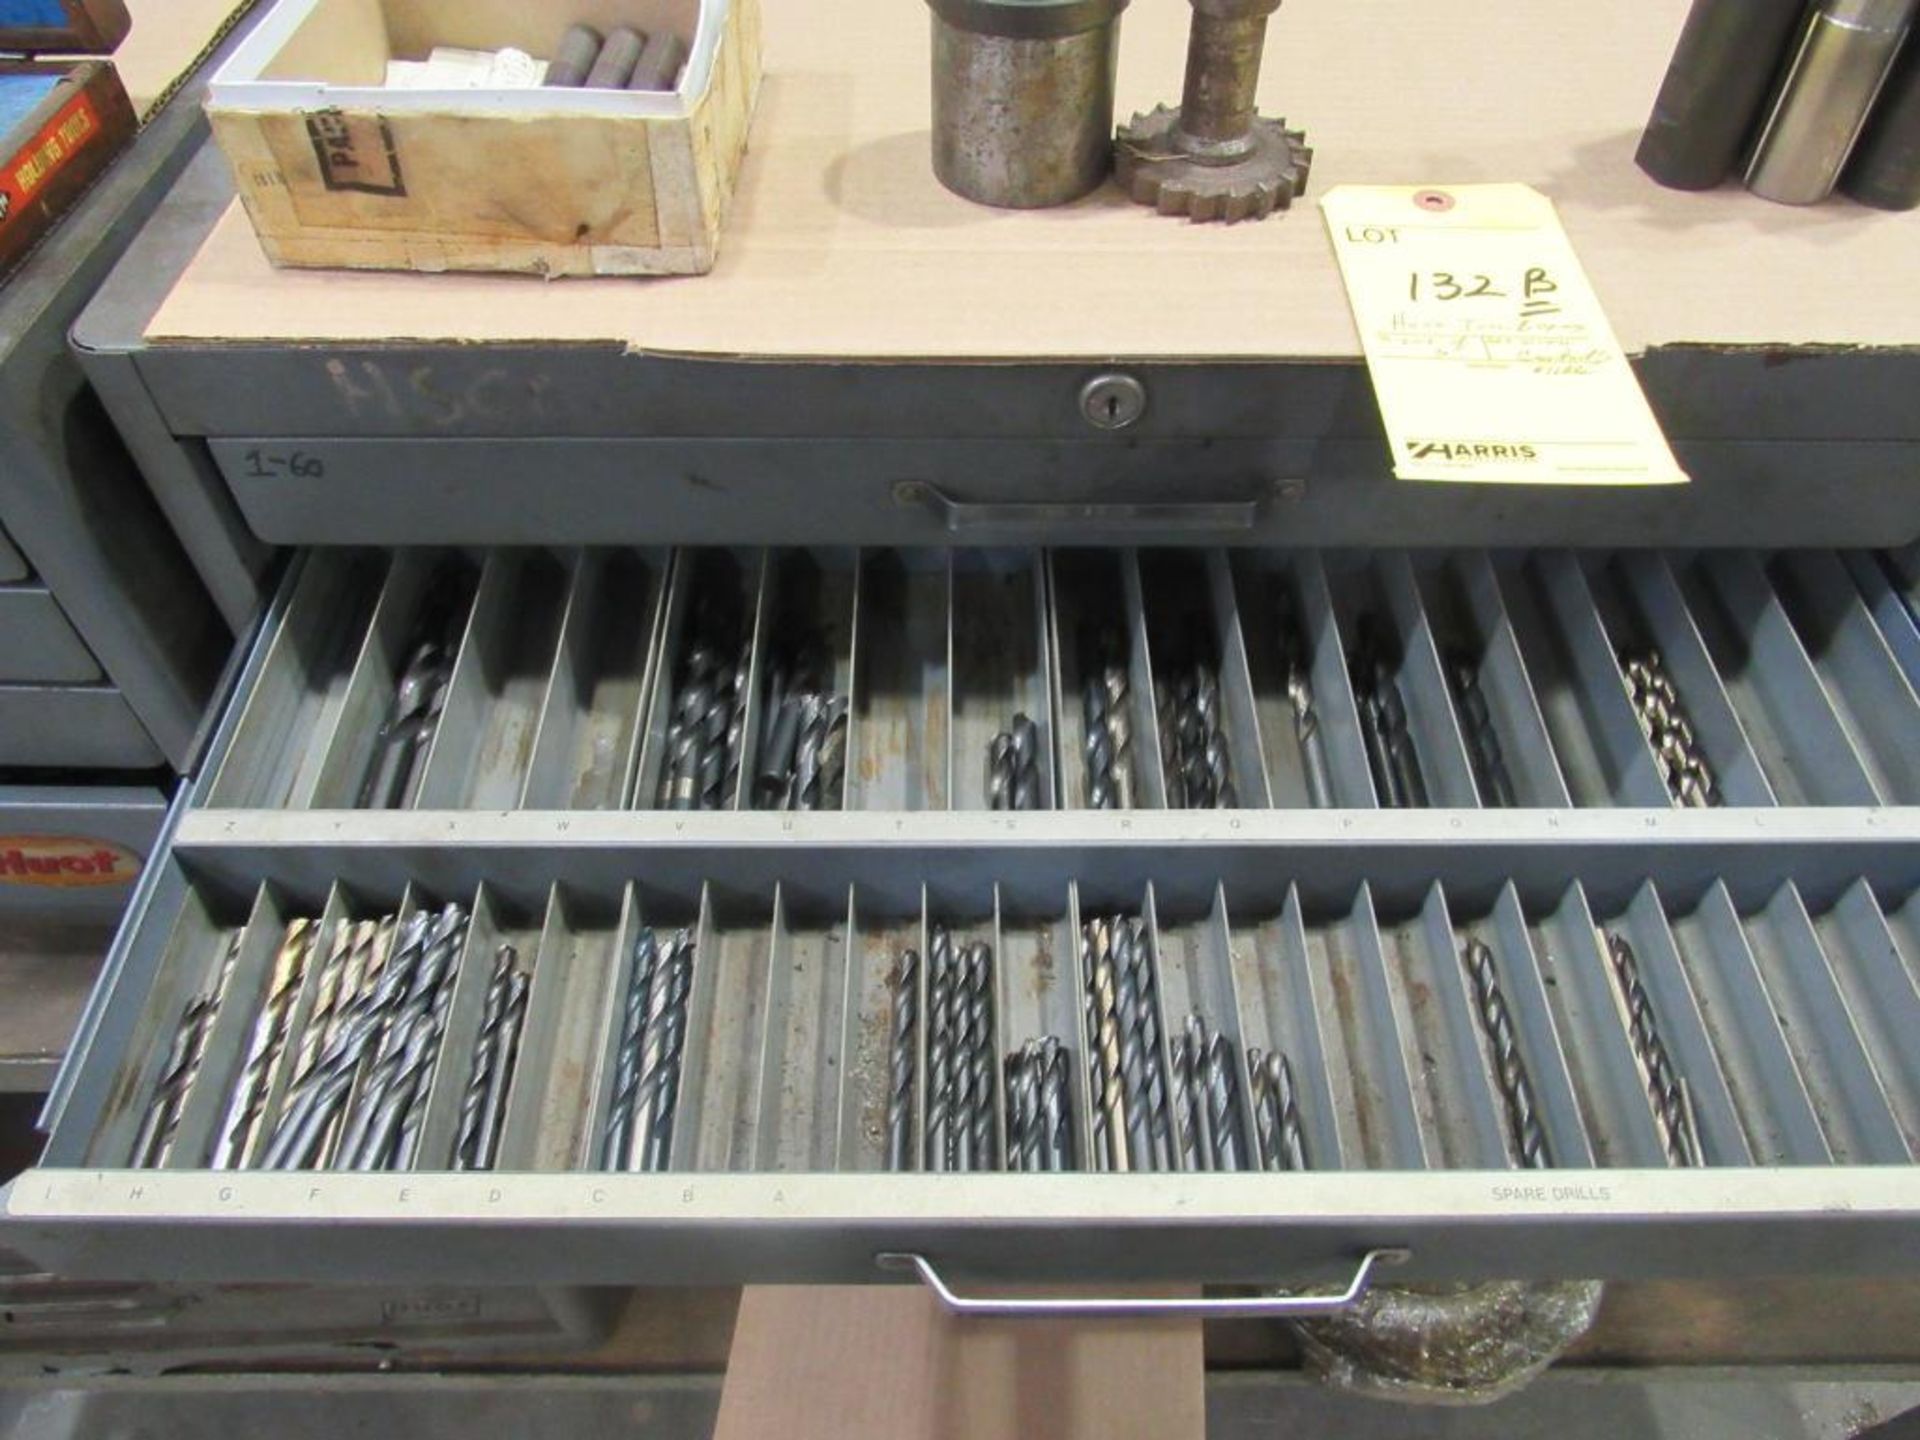 Lot of 3: Huot Tool Boxes with Assorted Size Drills, sockets, other, Operator Bench - Image 8 of 14